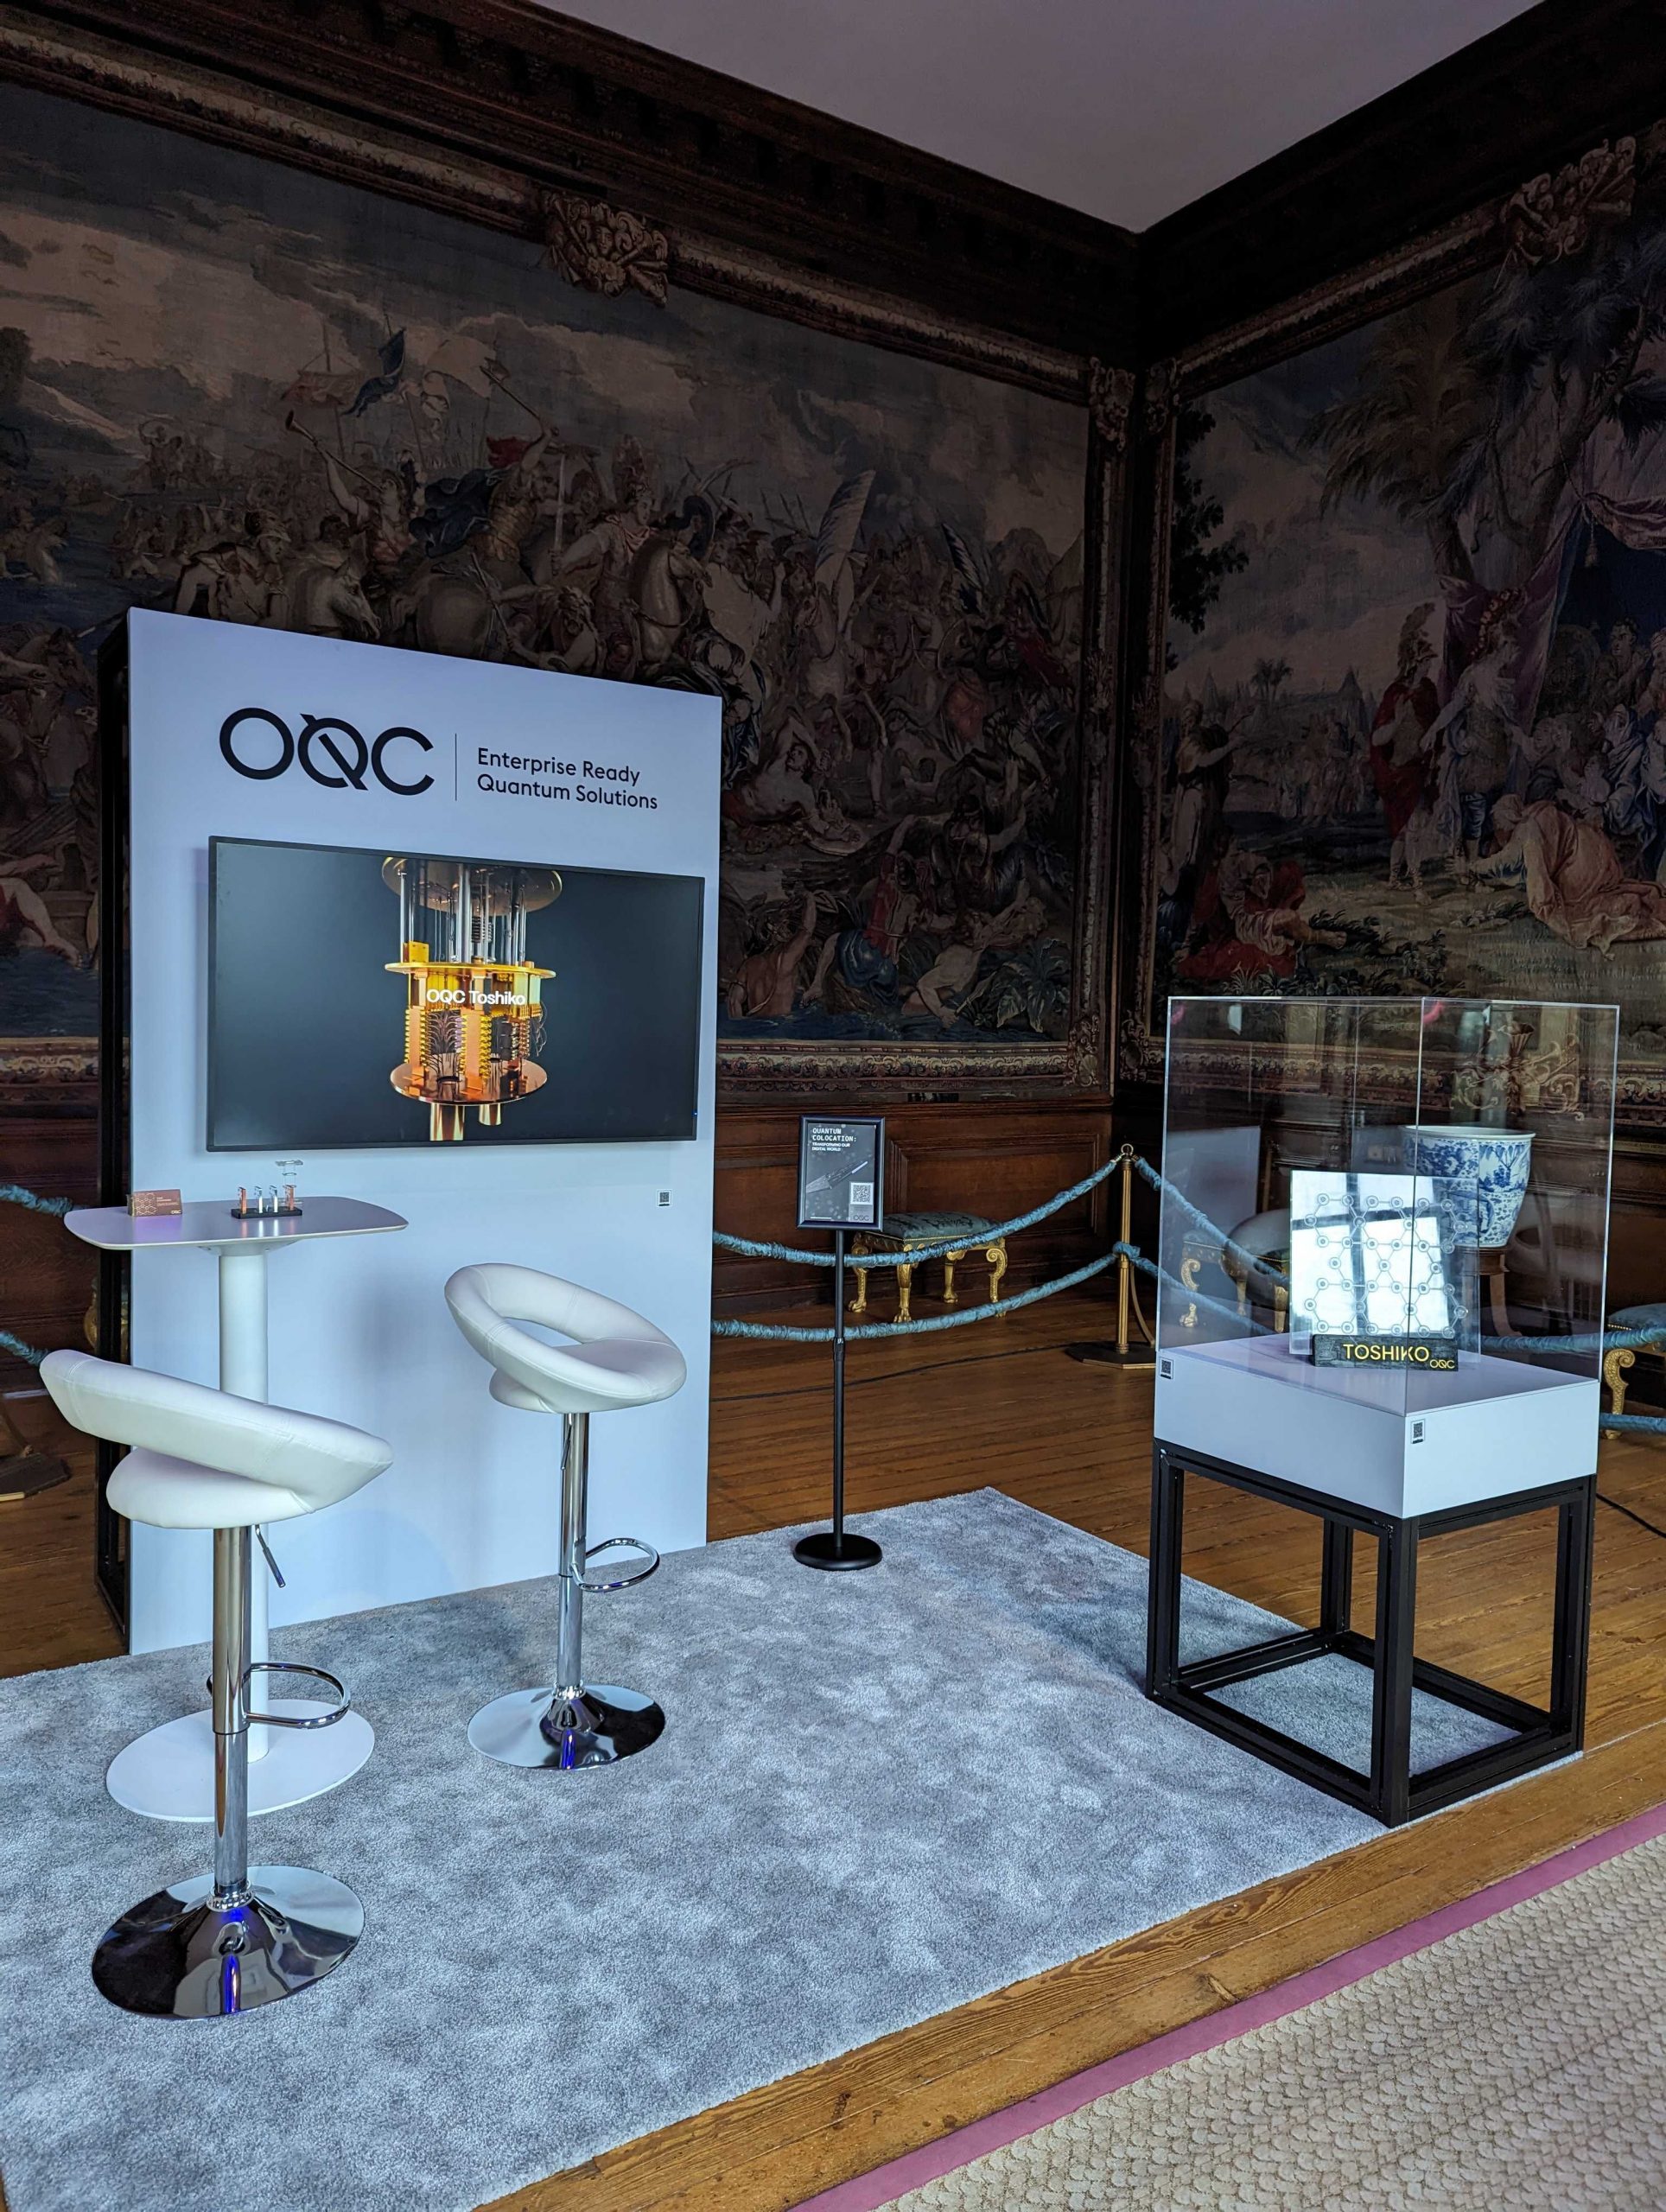 The OQC stand at the Global Investment Summit